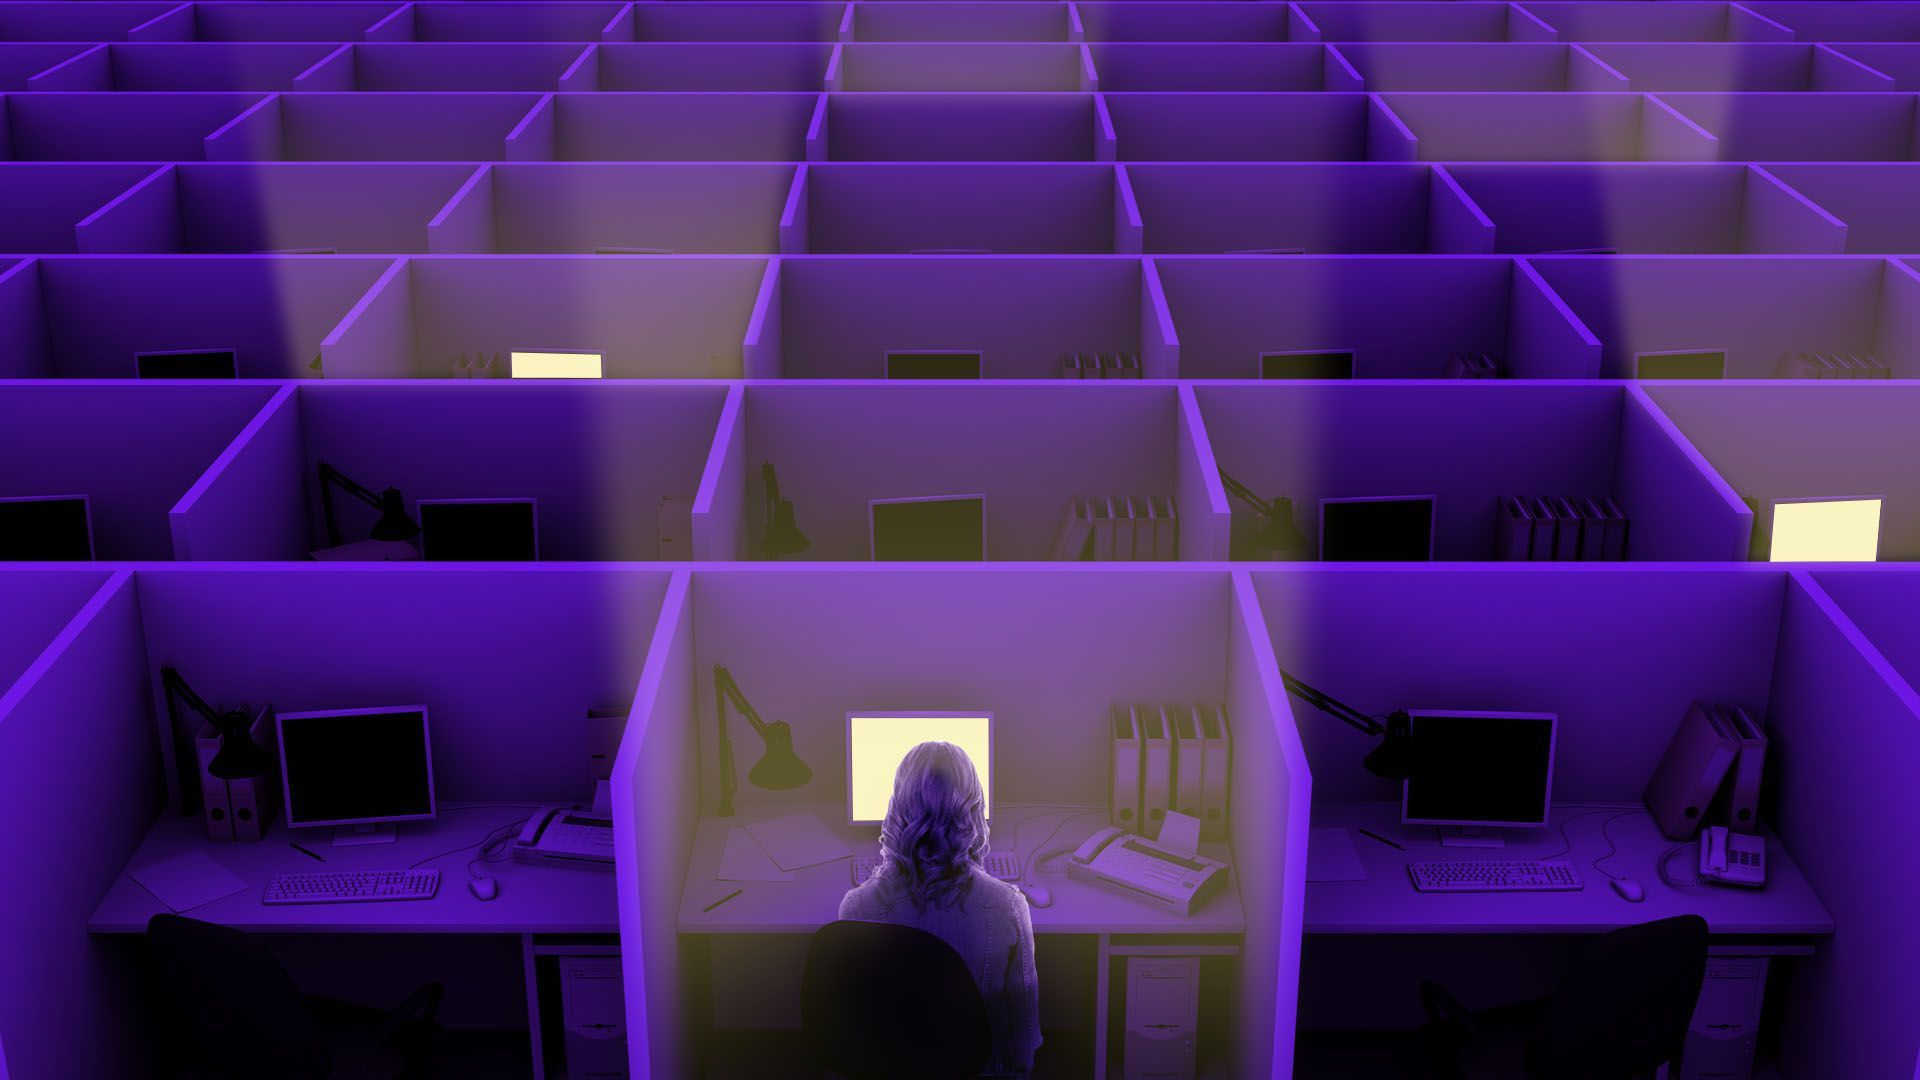 An illustration of a woman sitting at a computer a cubicle working at night